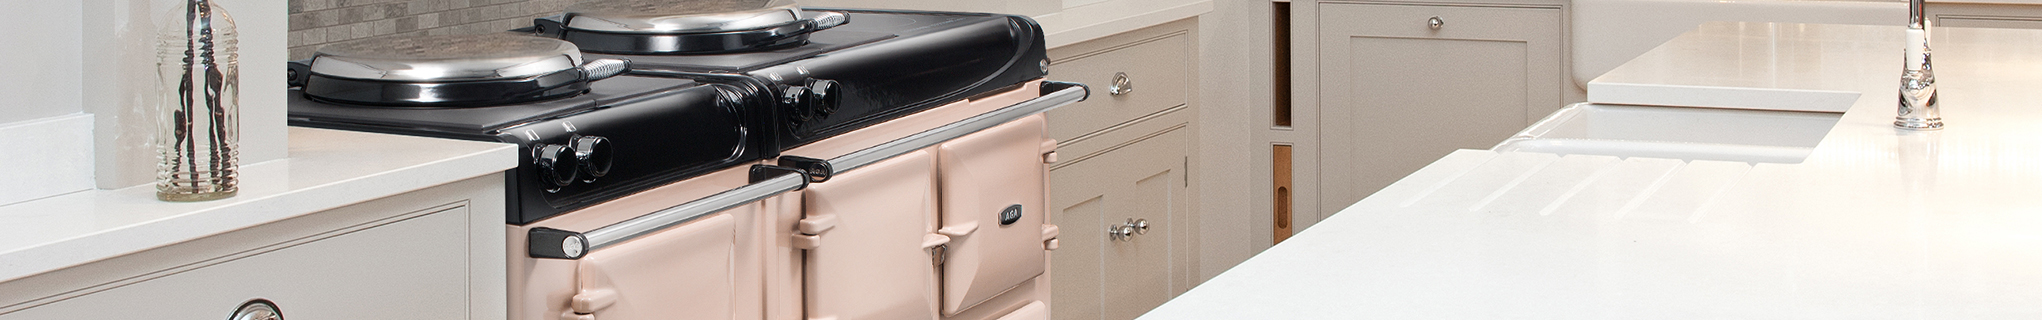 AGA eR3 Series 160 in Blush with white cabinetry 